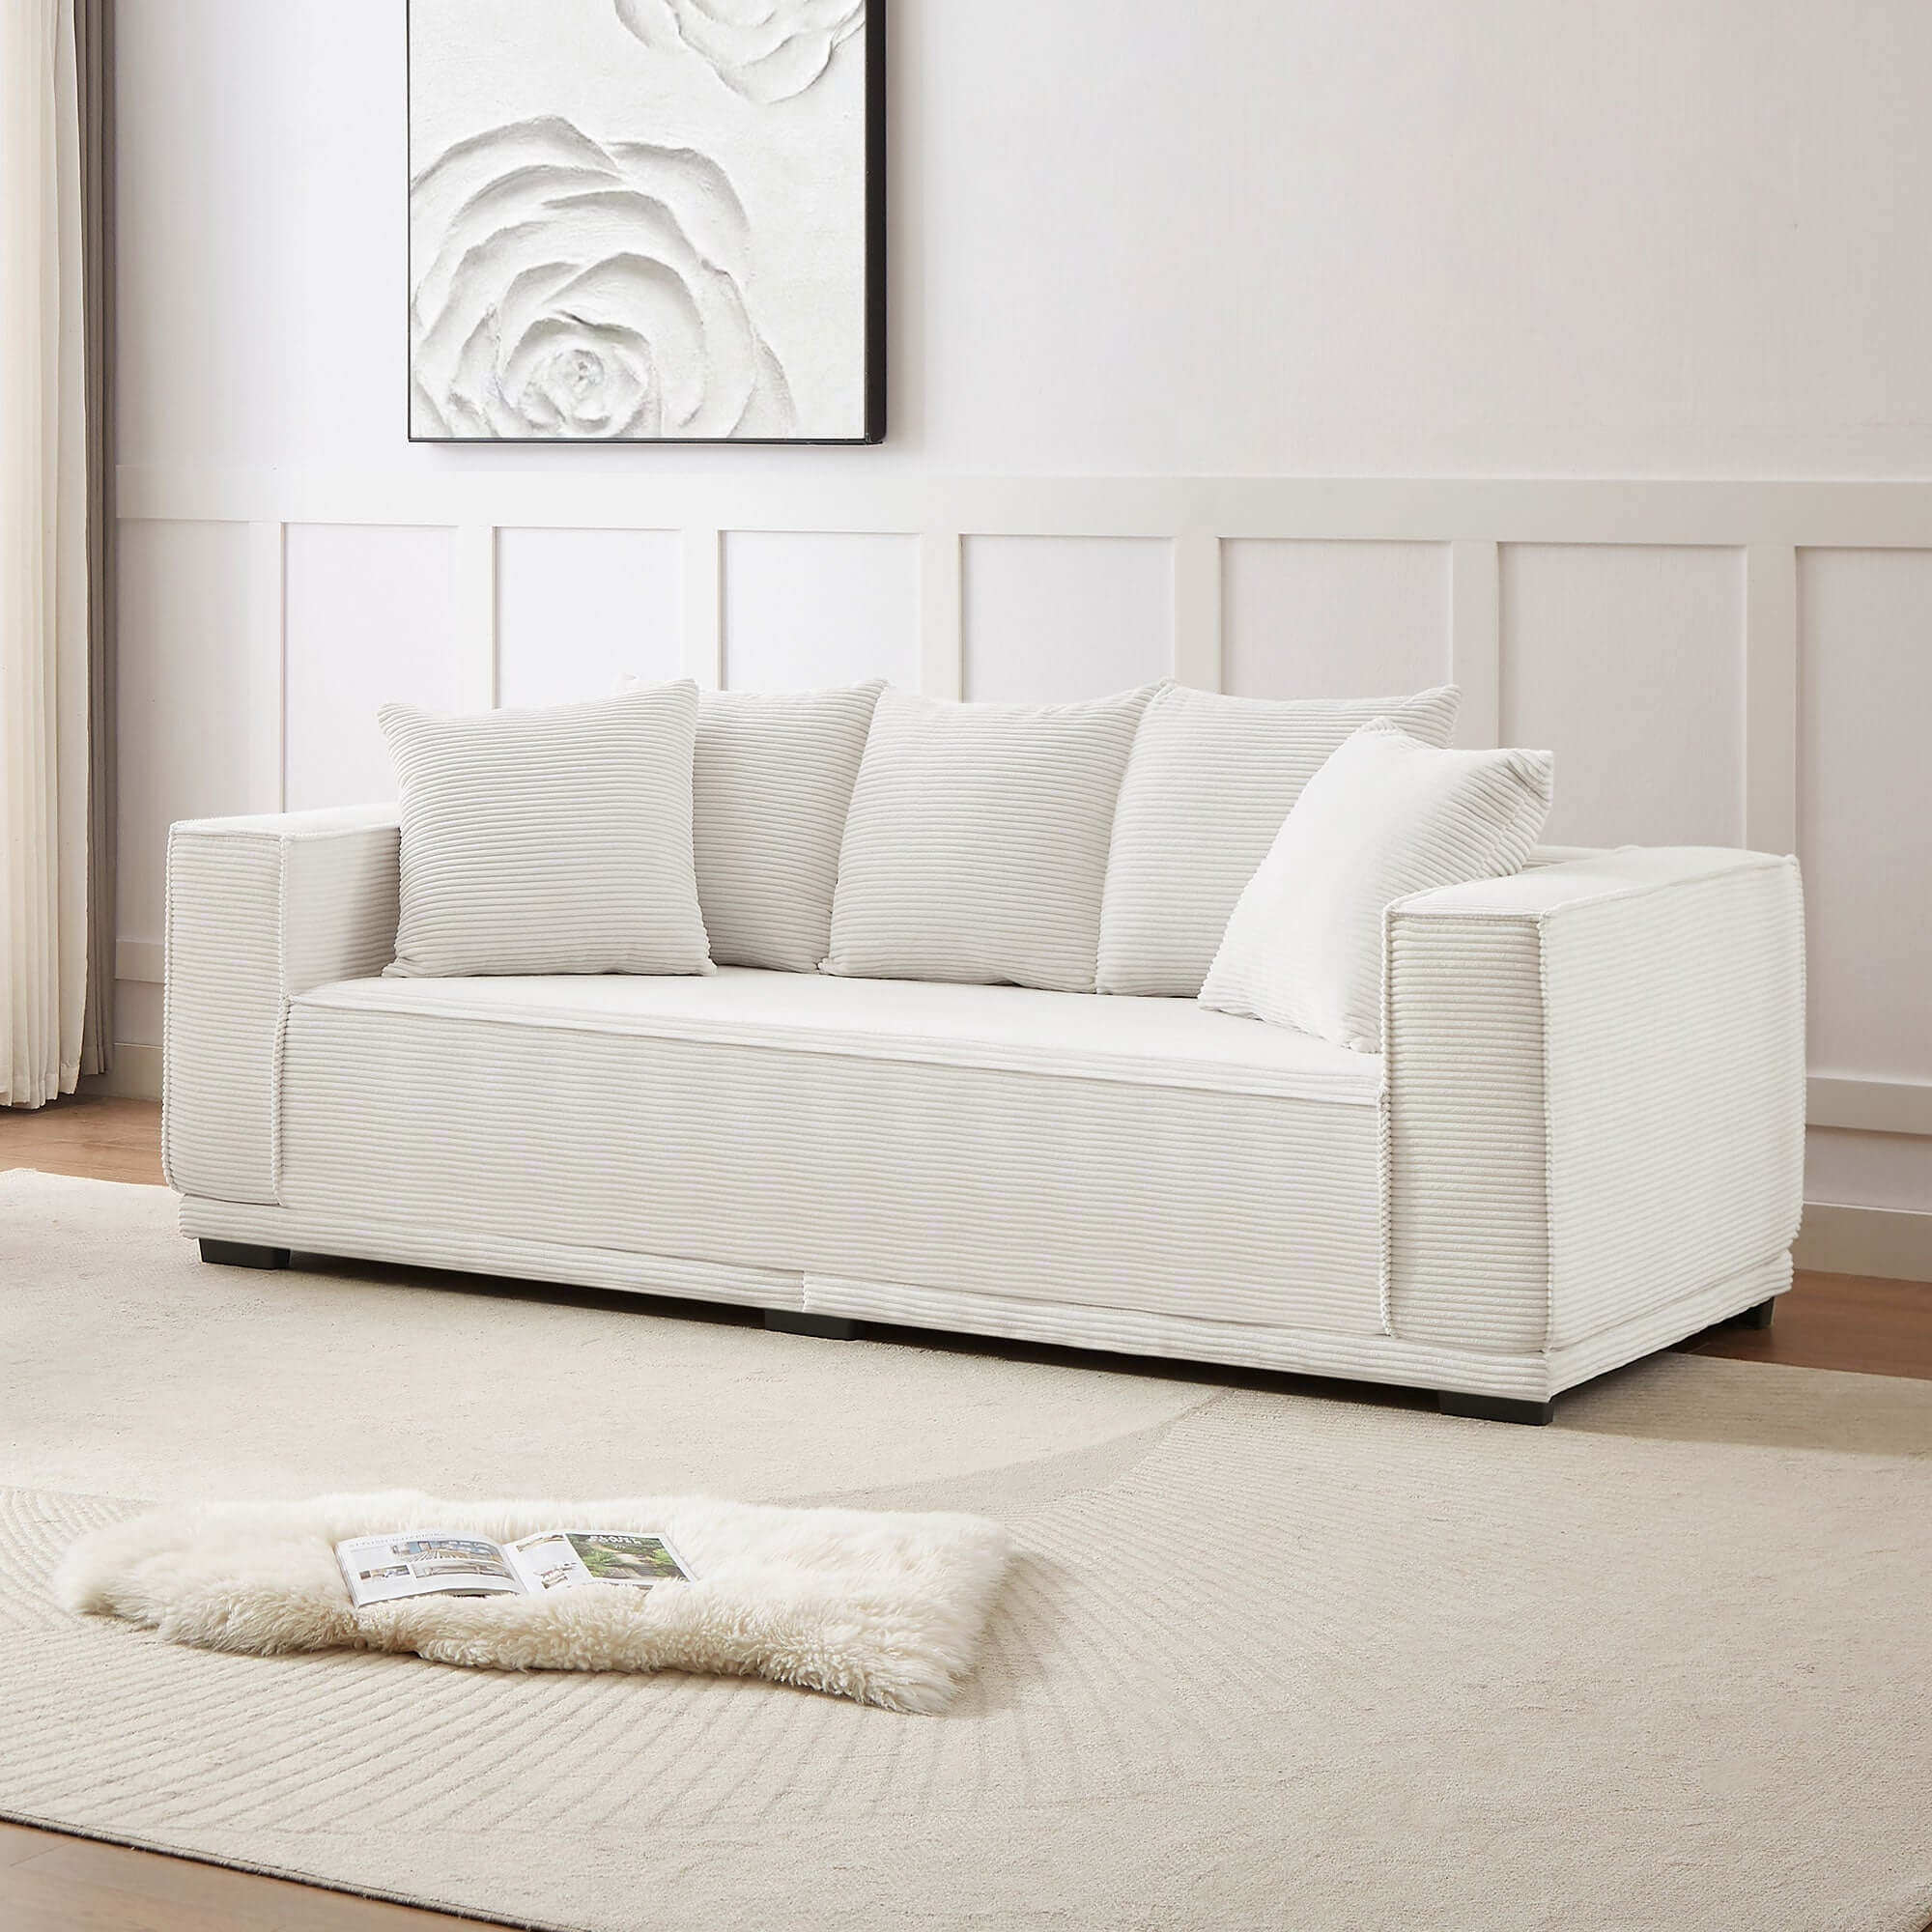 Louie Modern Corduroy Sofa, 3-Seater Couch for Living Room, Bedroom, Apartment in White